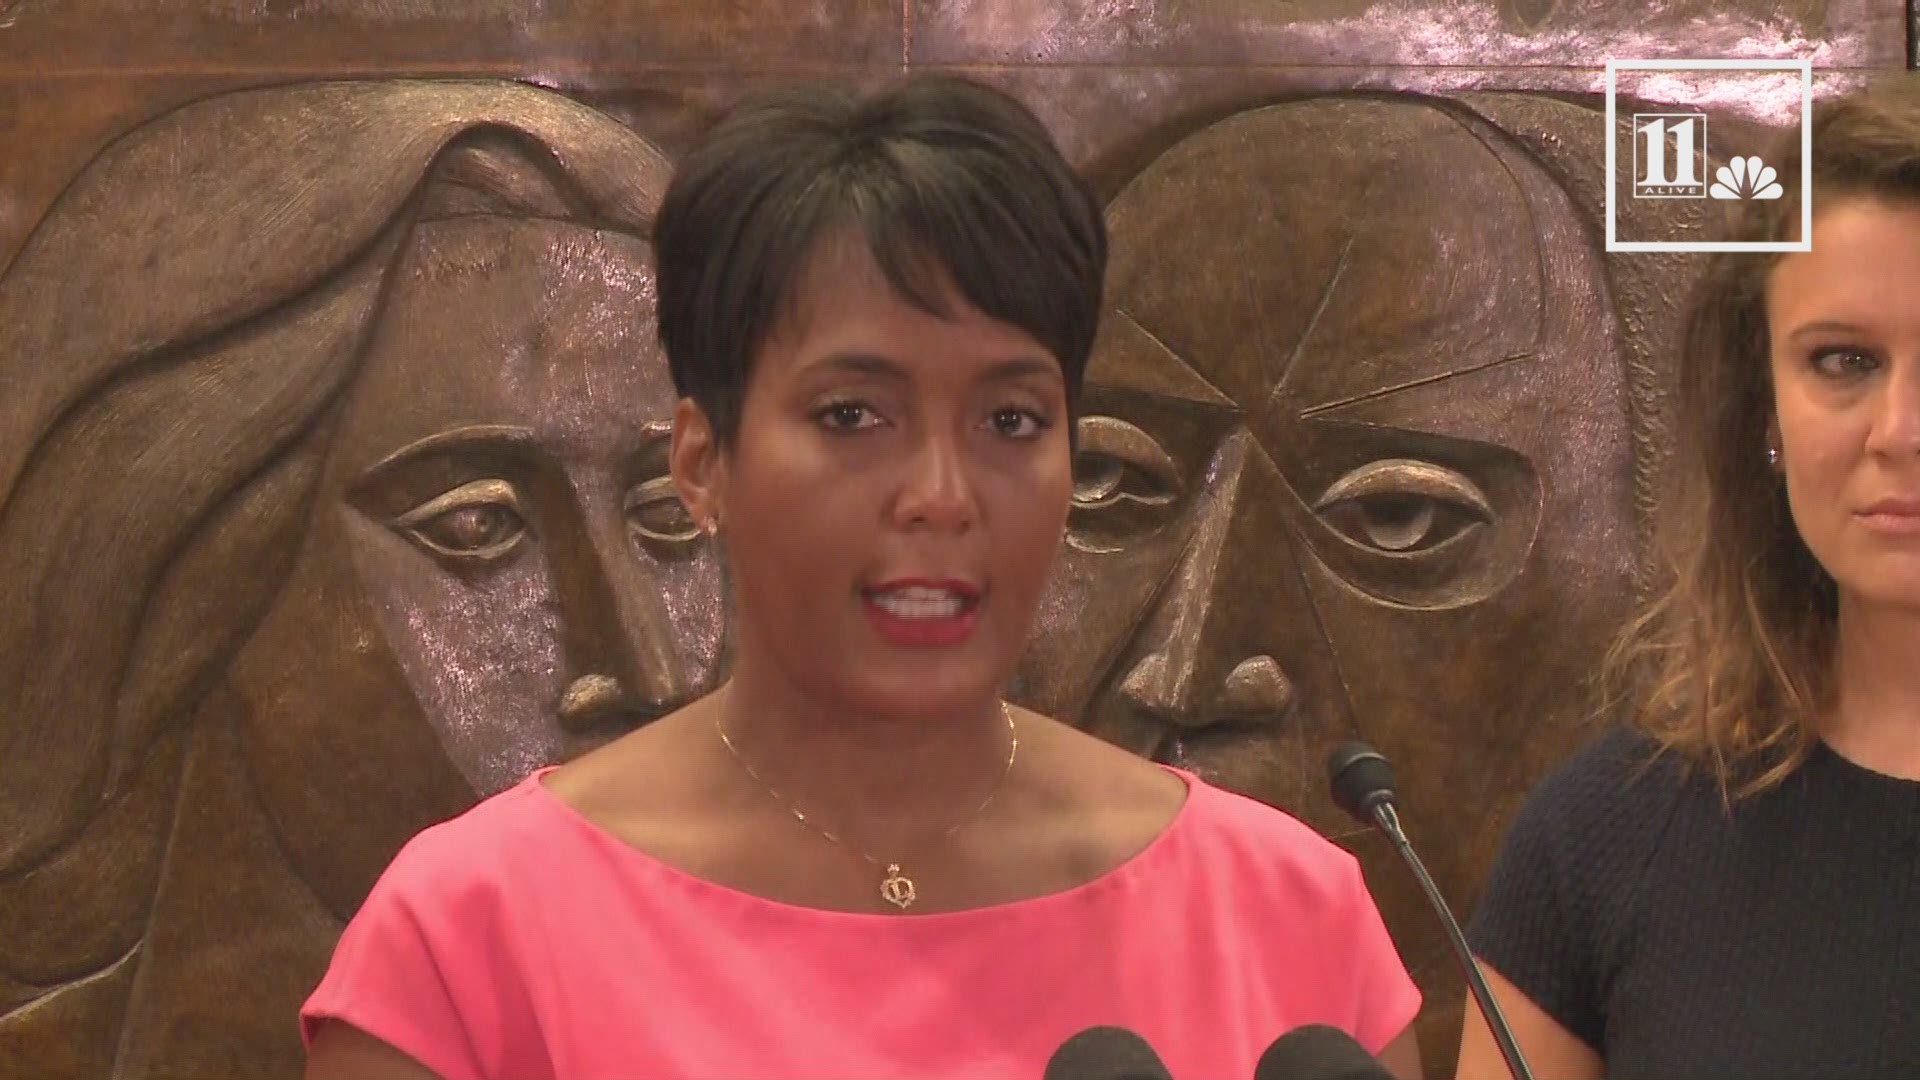 Atlanta is preparing to permanently end its relationship with Immigration and Customs Enforcement (ICE) in regards to accepting immigration detainees at the Atlanta City Jail, Mayor Keisha Lance Bottoms announced Thursday.